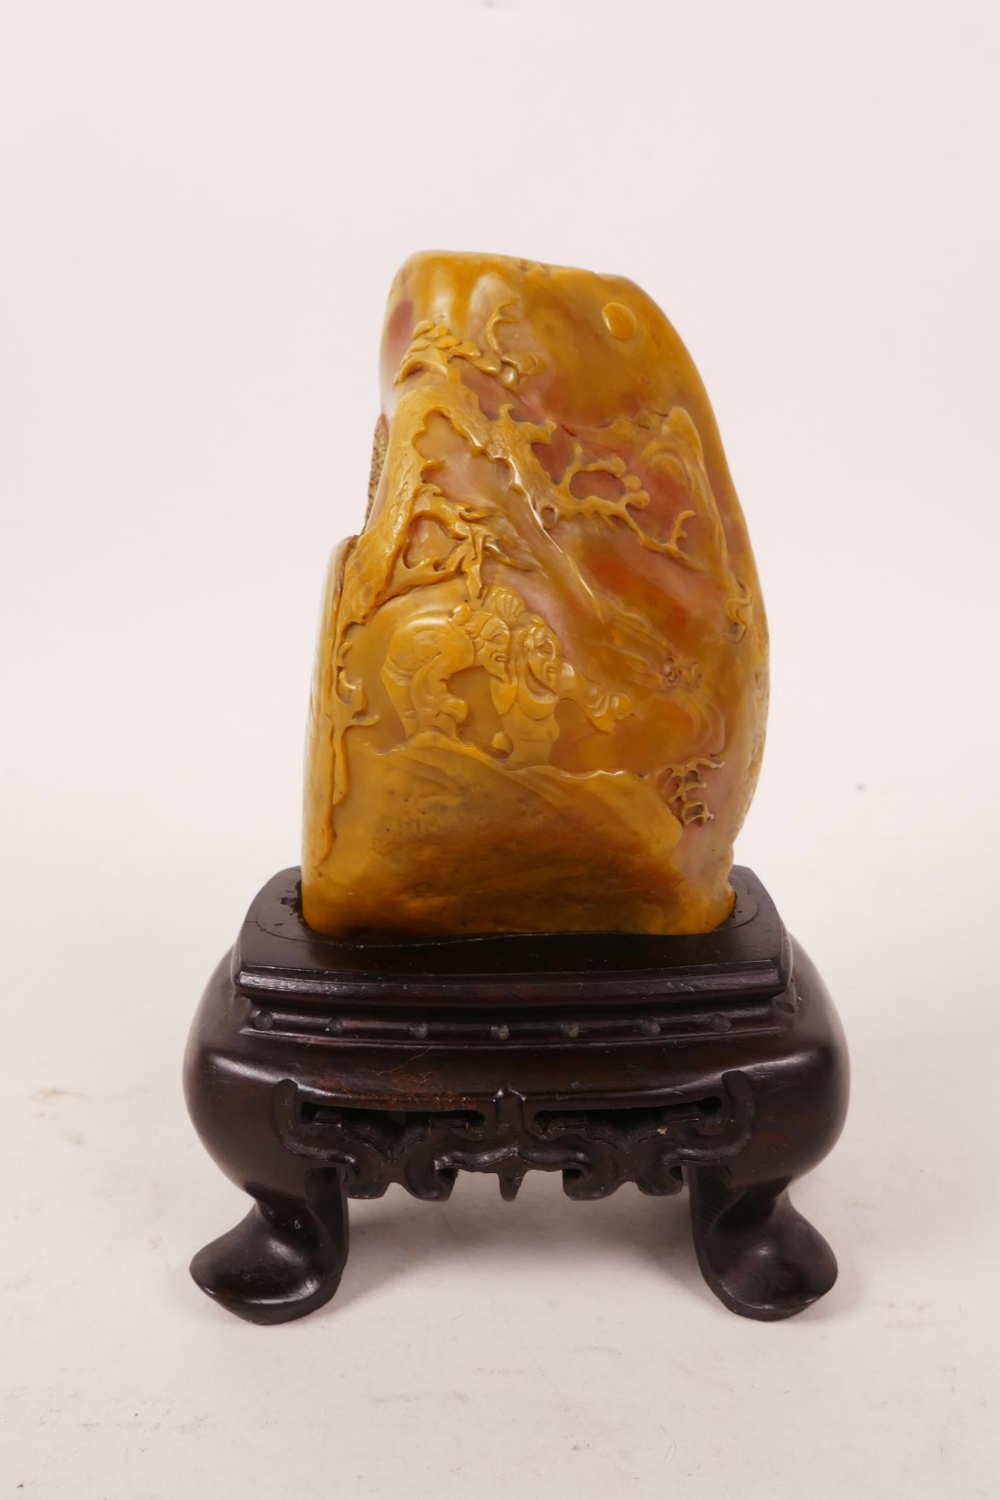 A Chinese soapstone carving of figures in a landscape, on a hardwood stand, 4" high